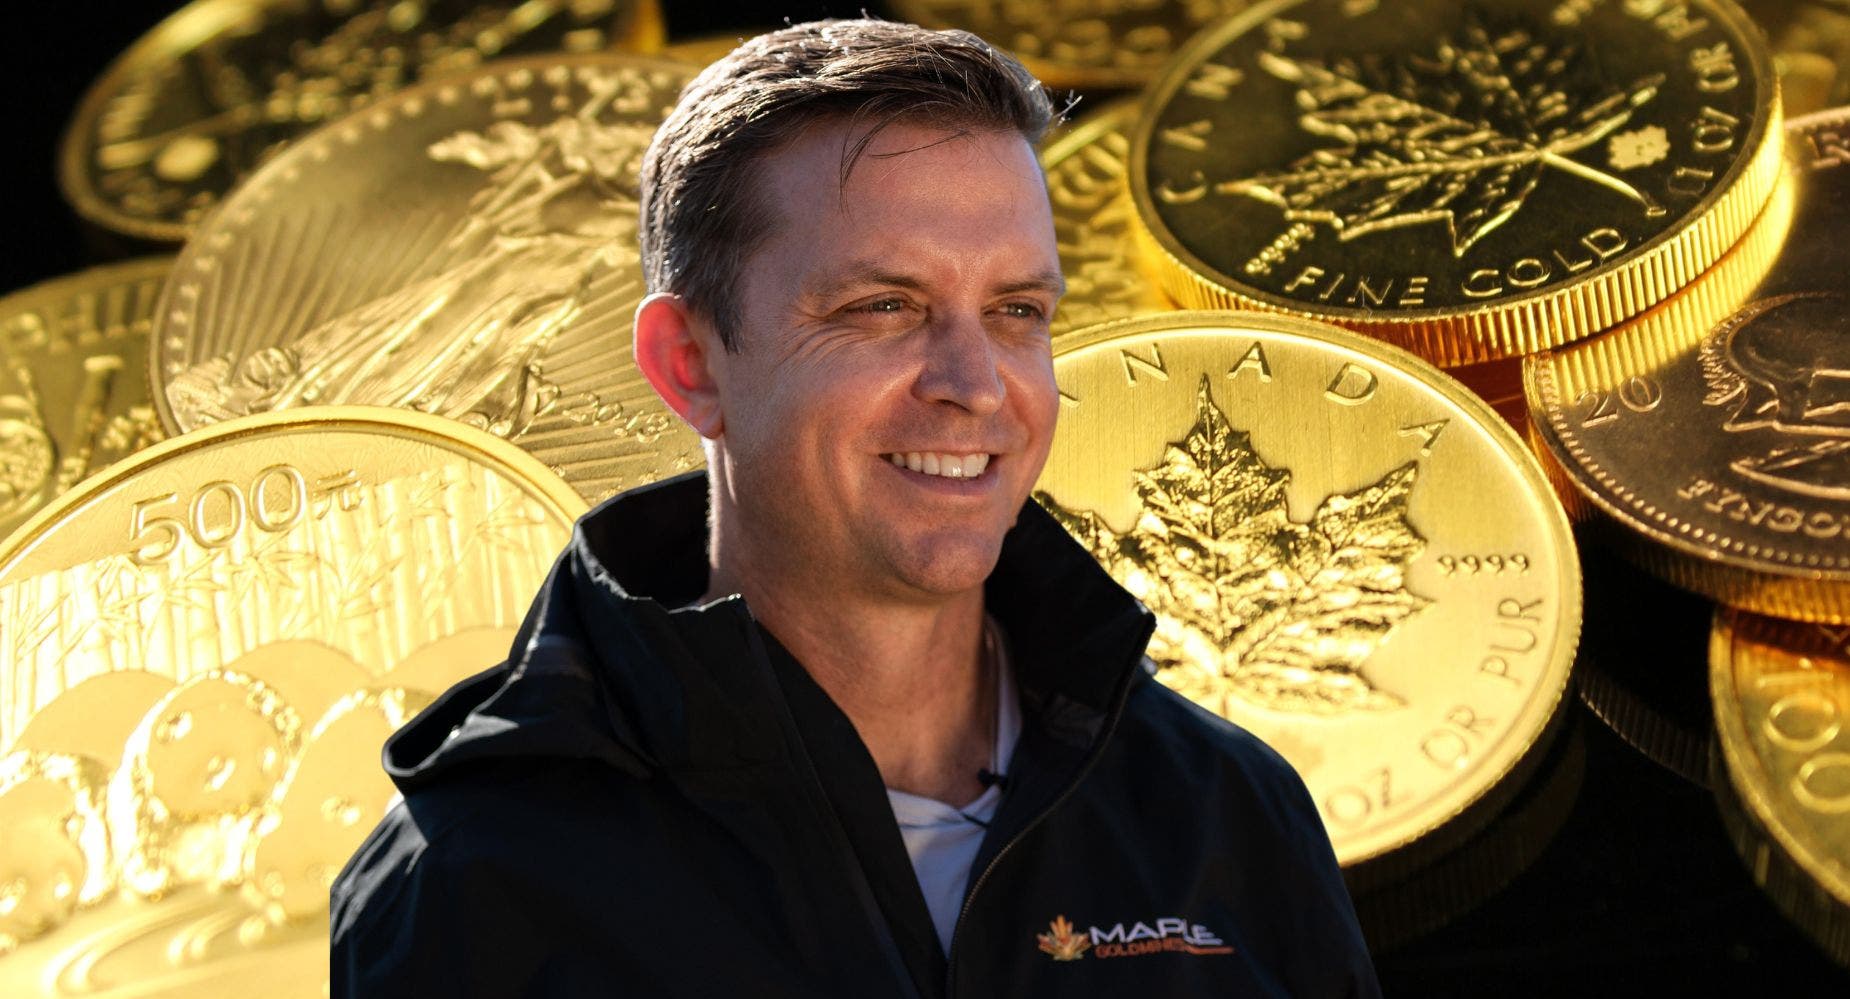 EXCLUSIVE: Maple Gold Mines CEO On The Gold Outlook, Bitcoin And What's Next For The Miner In 2023